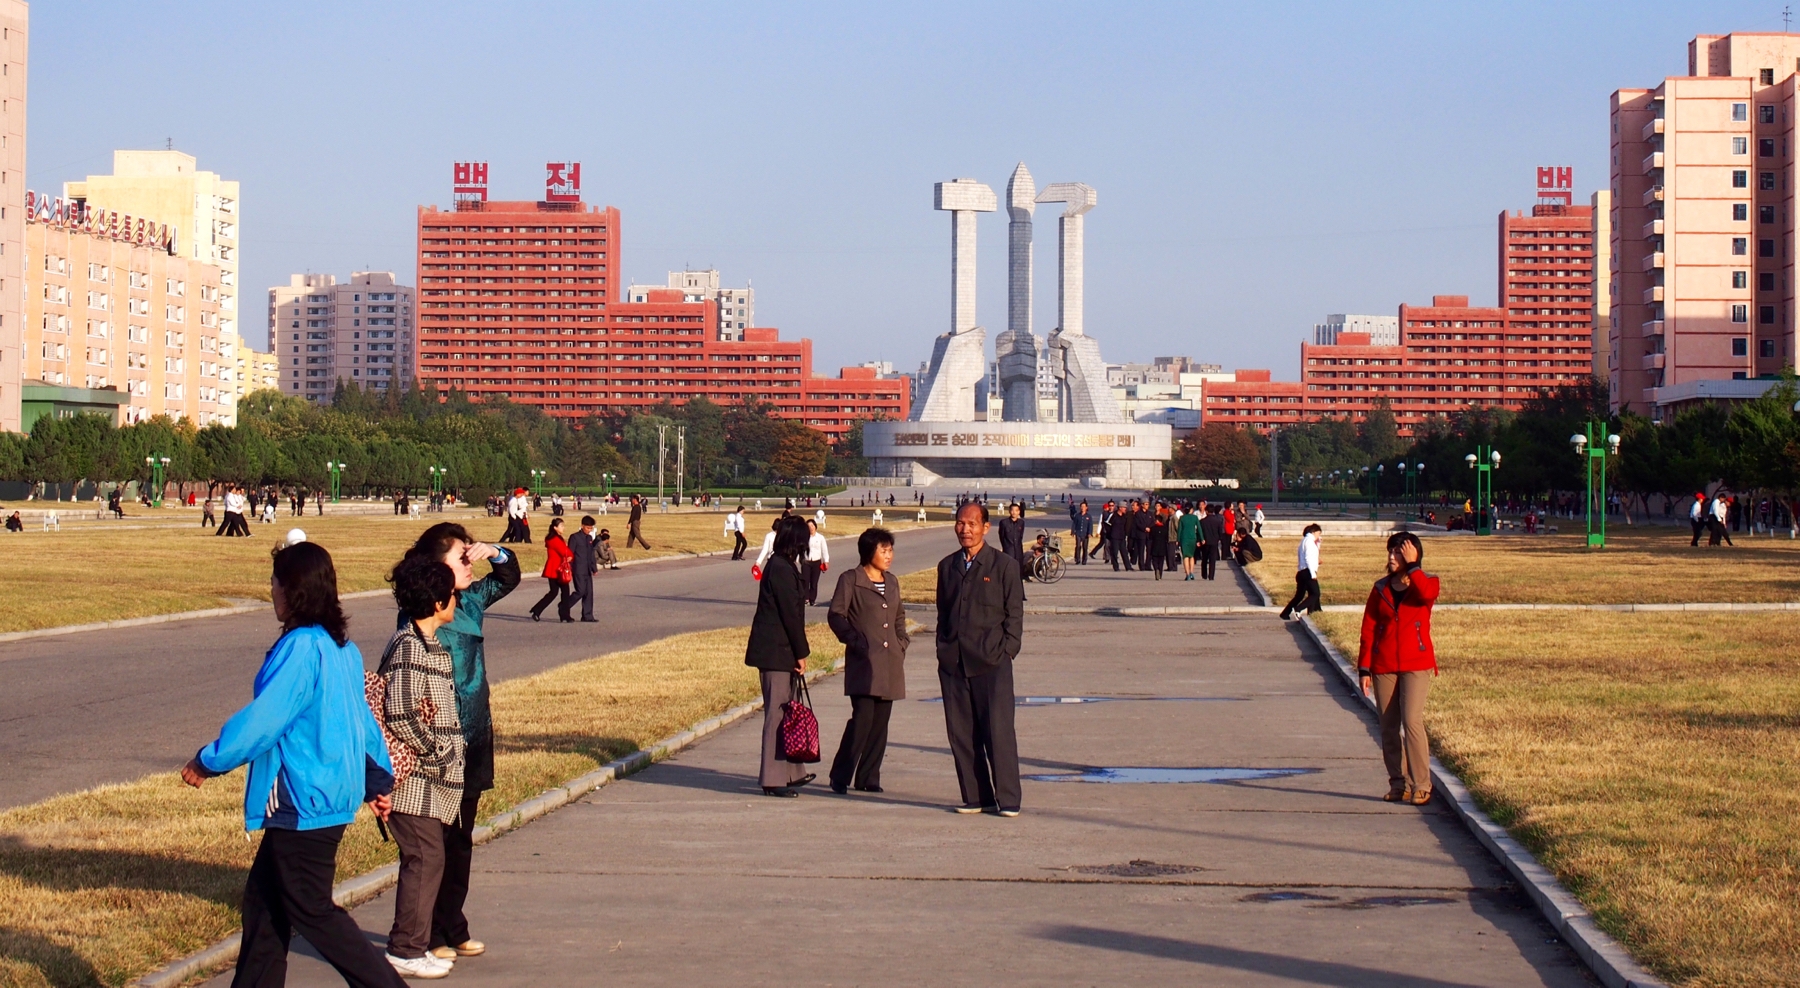 A beautiful day for a stroll in the park in front of the Workers Party Monument